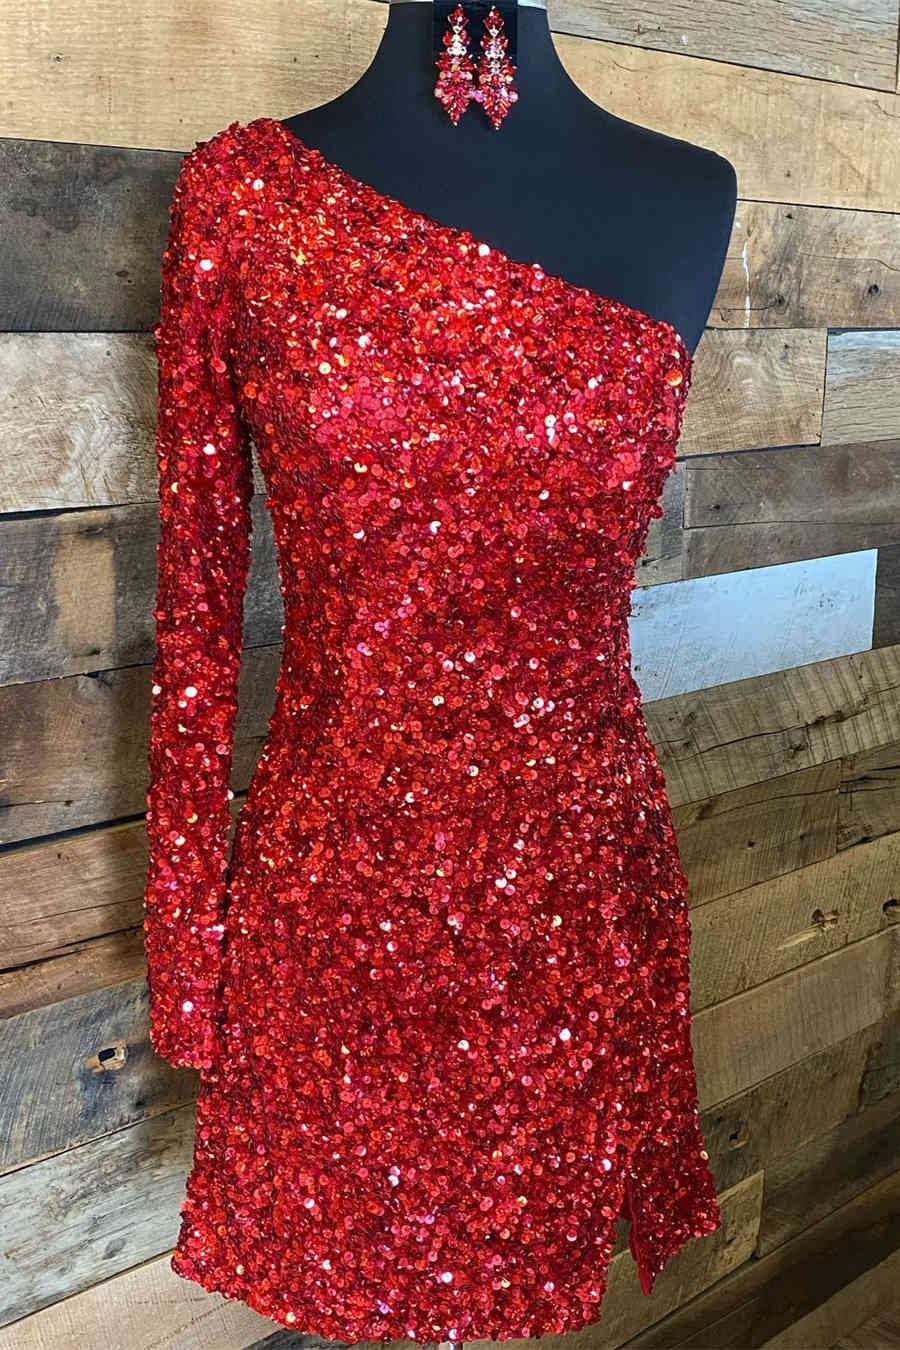 Black Tie Wedding Guest Dress, Glitter One Sleeve Red Sequined Homecoming Dress,Stunning Cocktail Dresses Short Formal